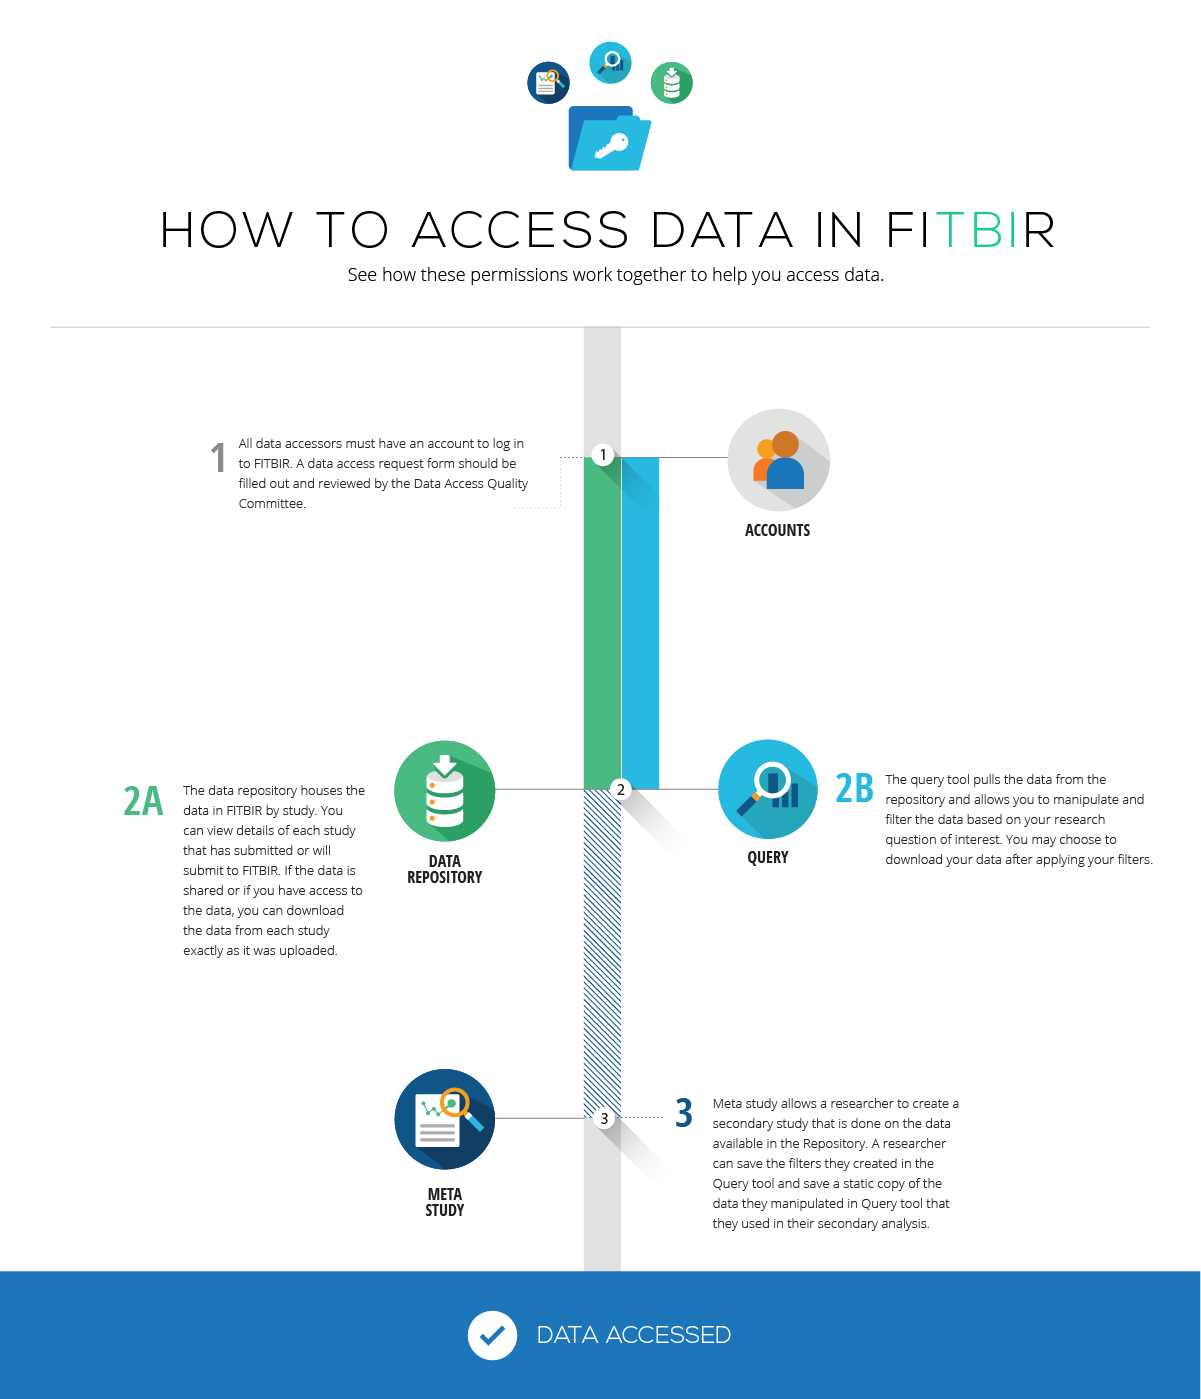 How to Access Data in FITBIR